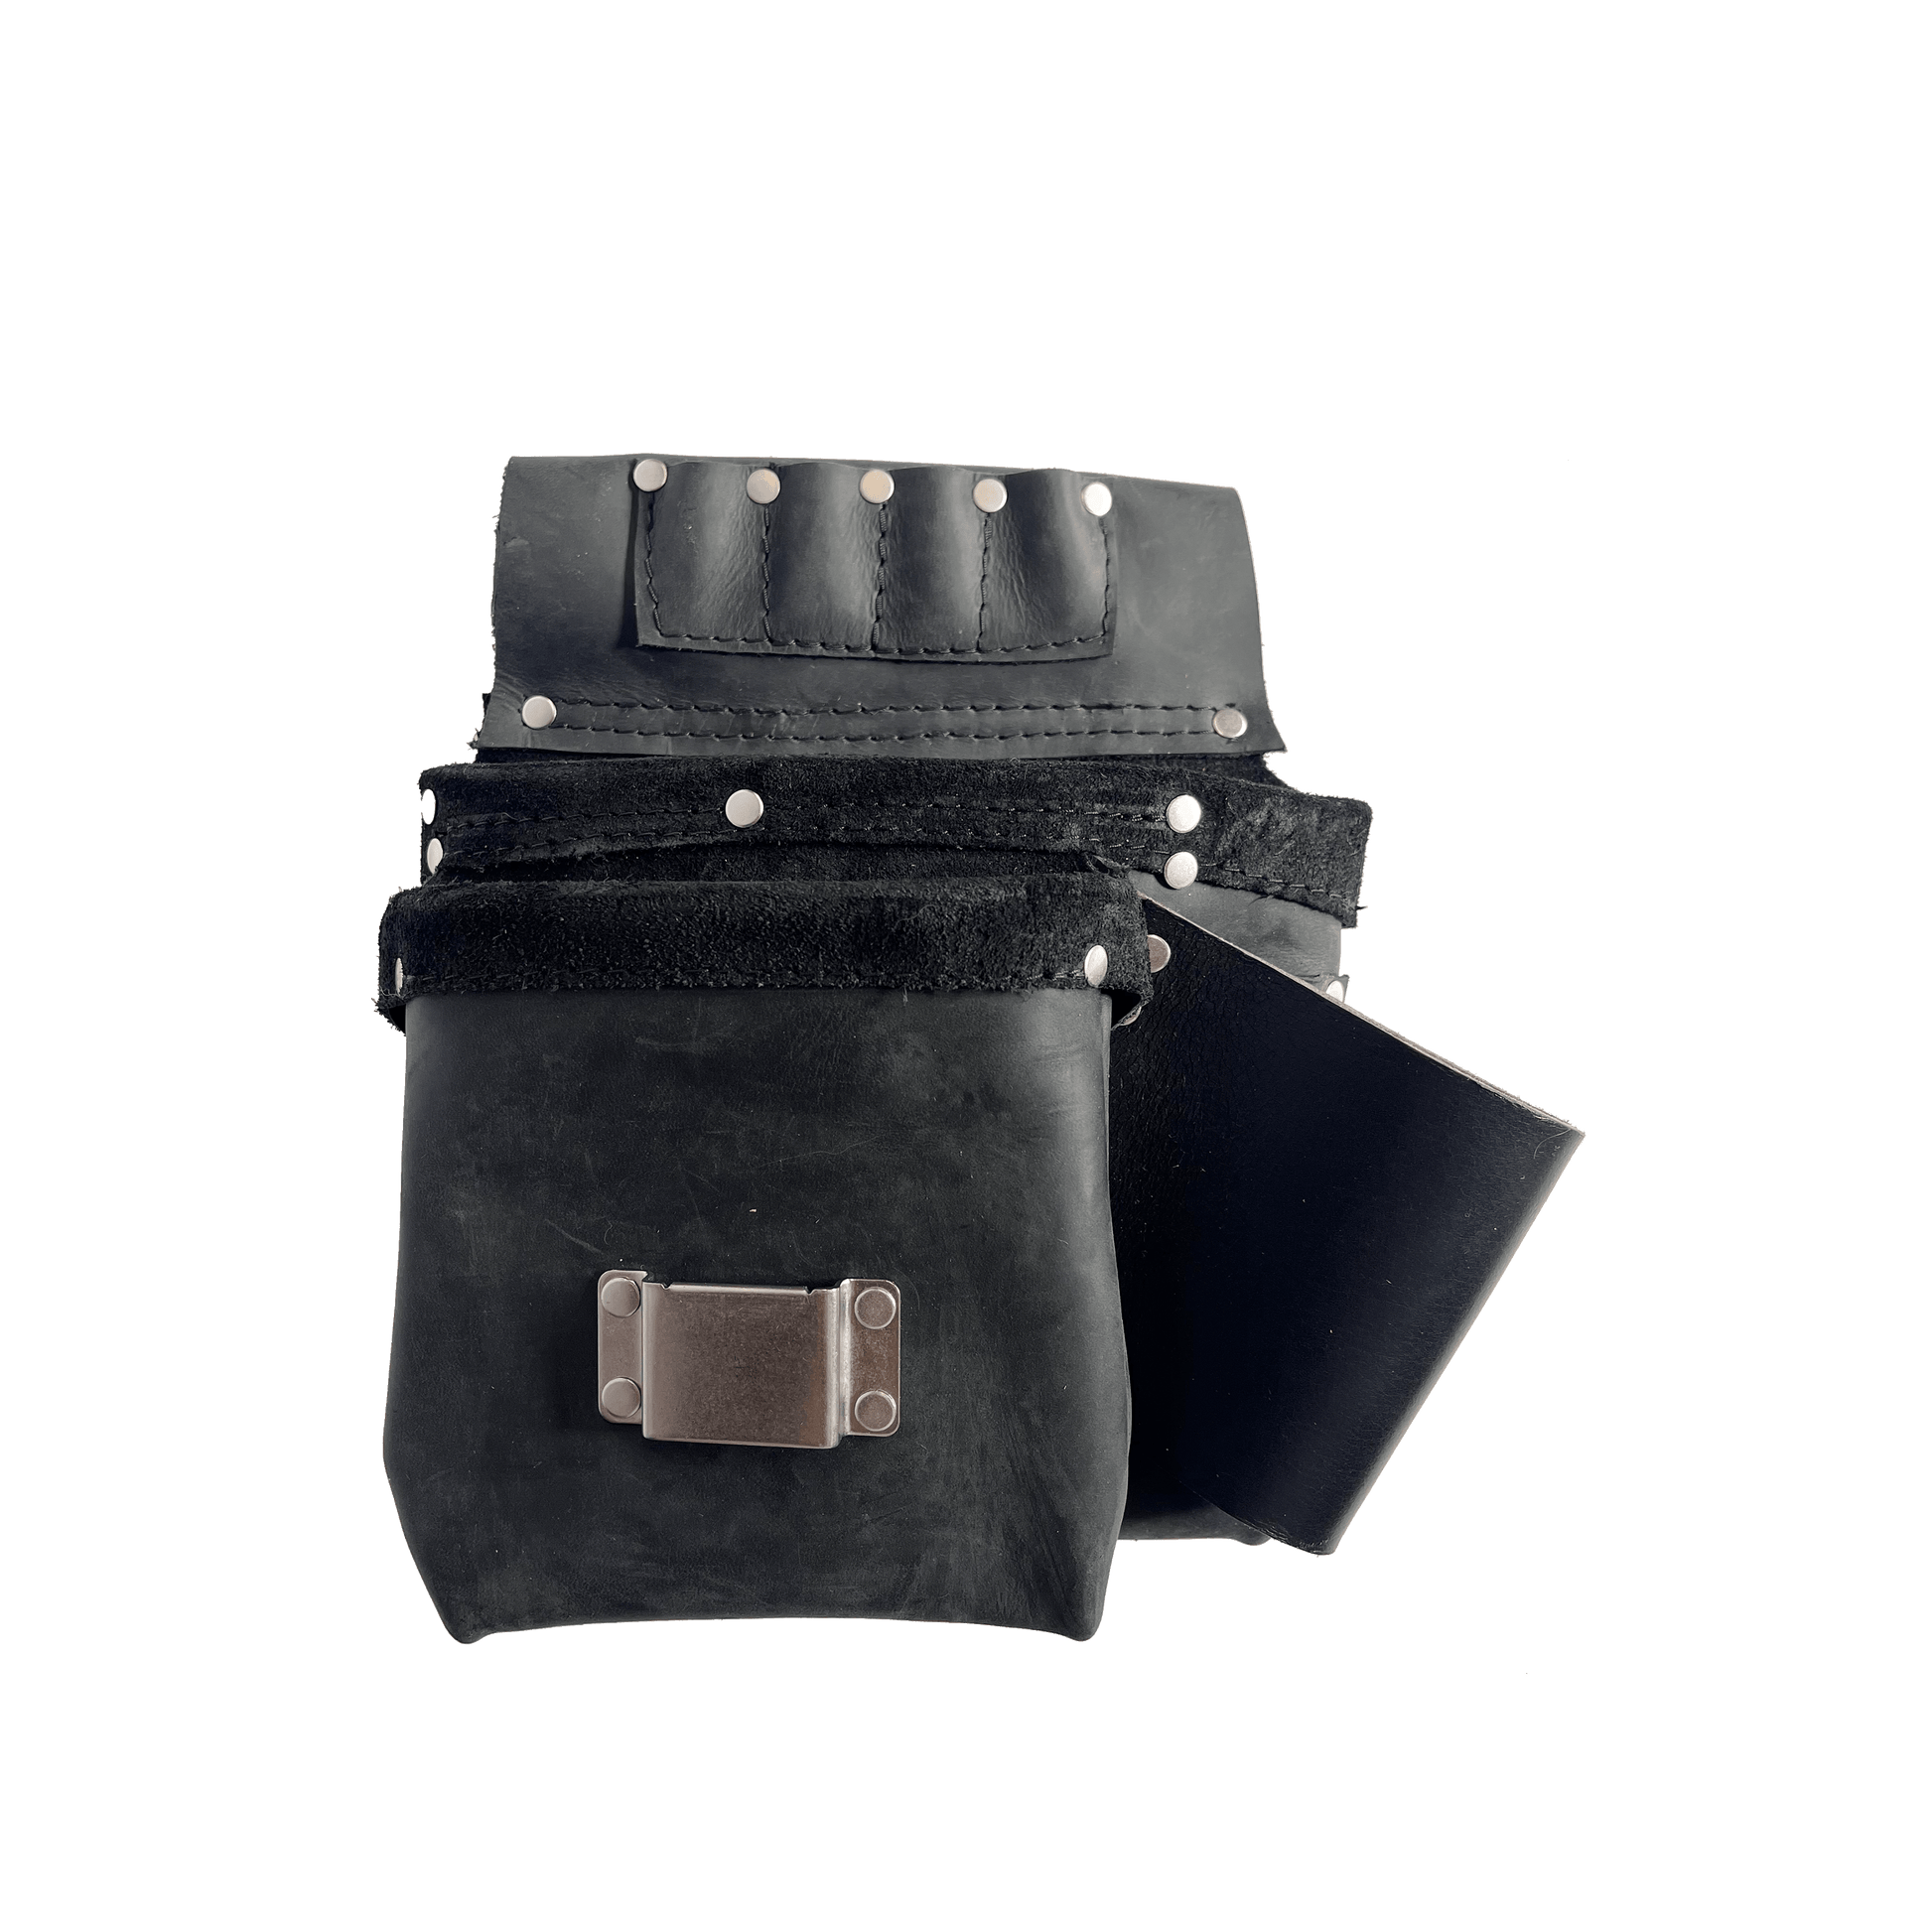 A set of three Belt Bag 1s from The Durham Leatherworker, made of black leather with silver studs and buckles, positioned overlapping each other against a dark background.